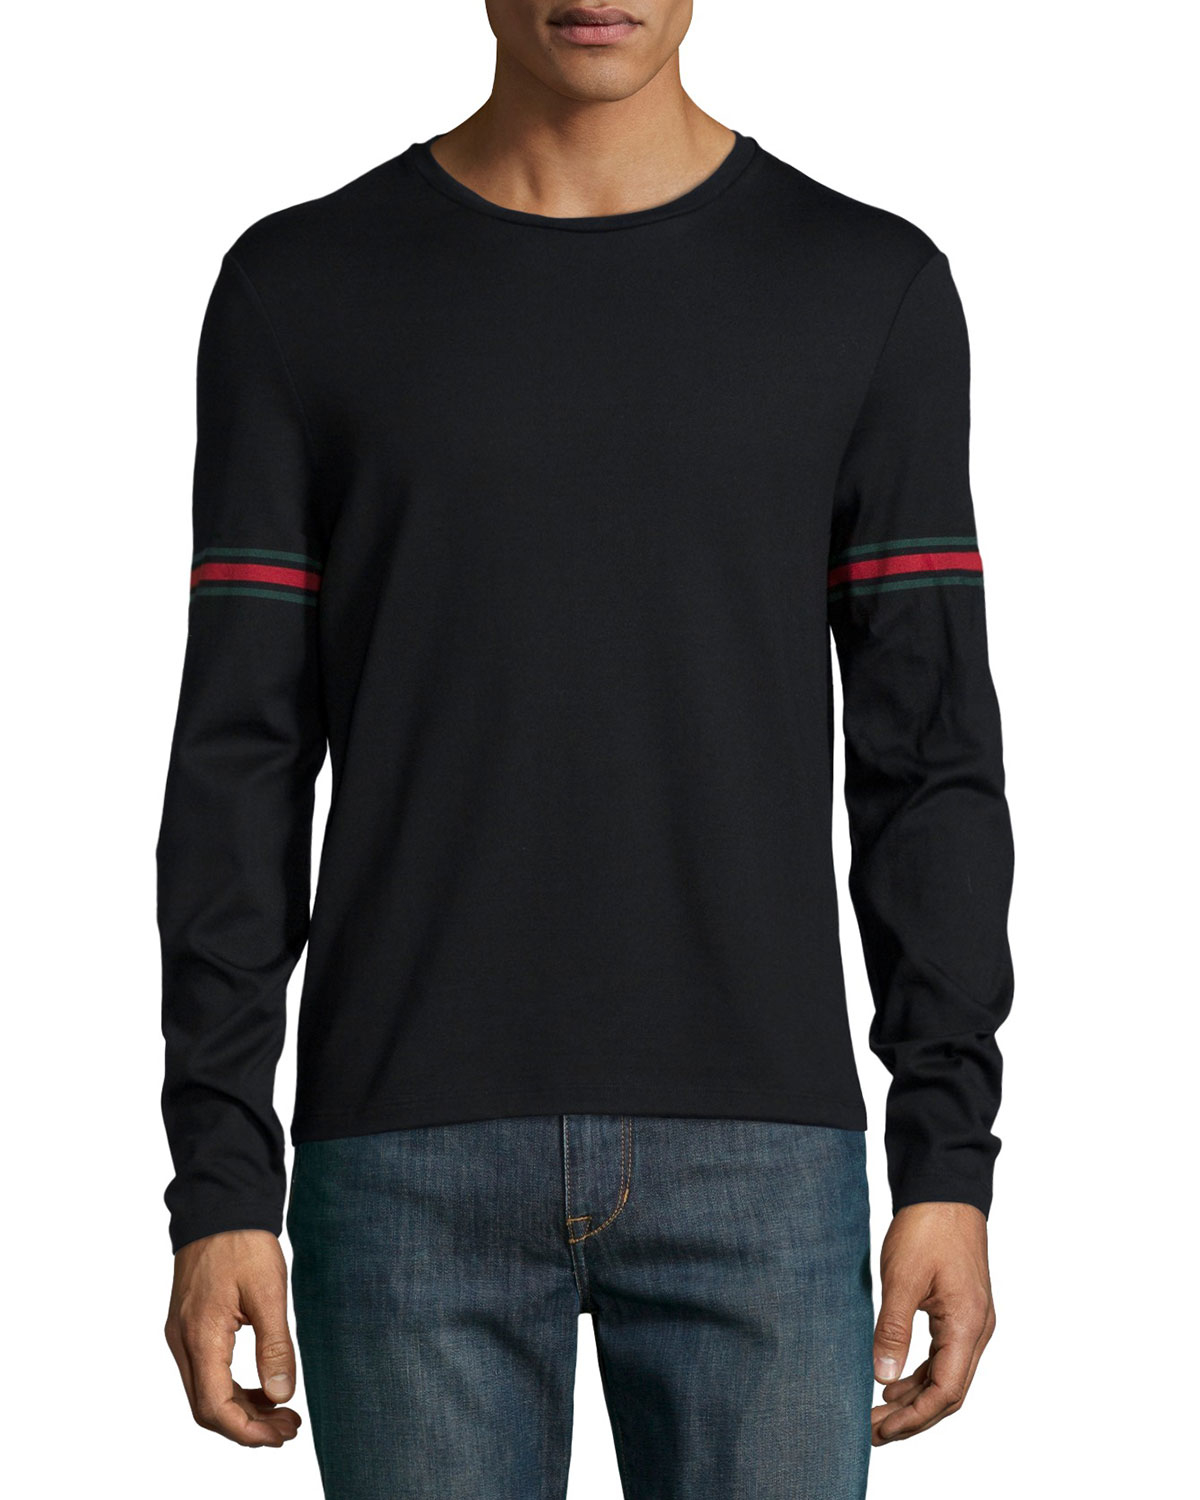 Lyst - Gucci Long-Sleeved T-Shirt with Arm Band Details in Black for Men